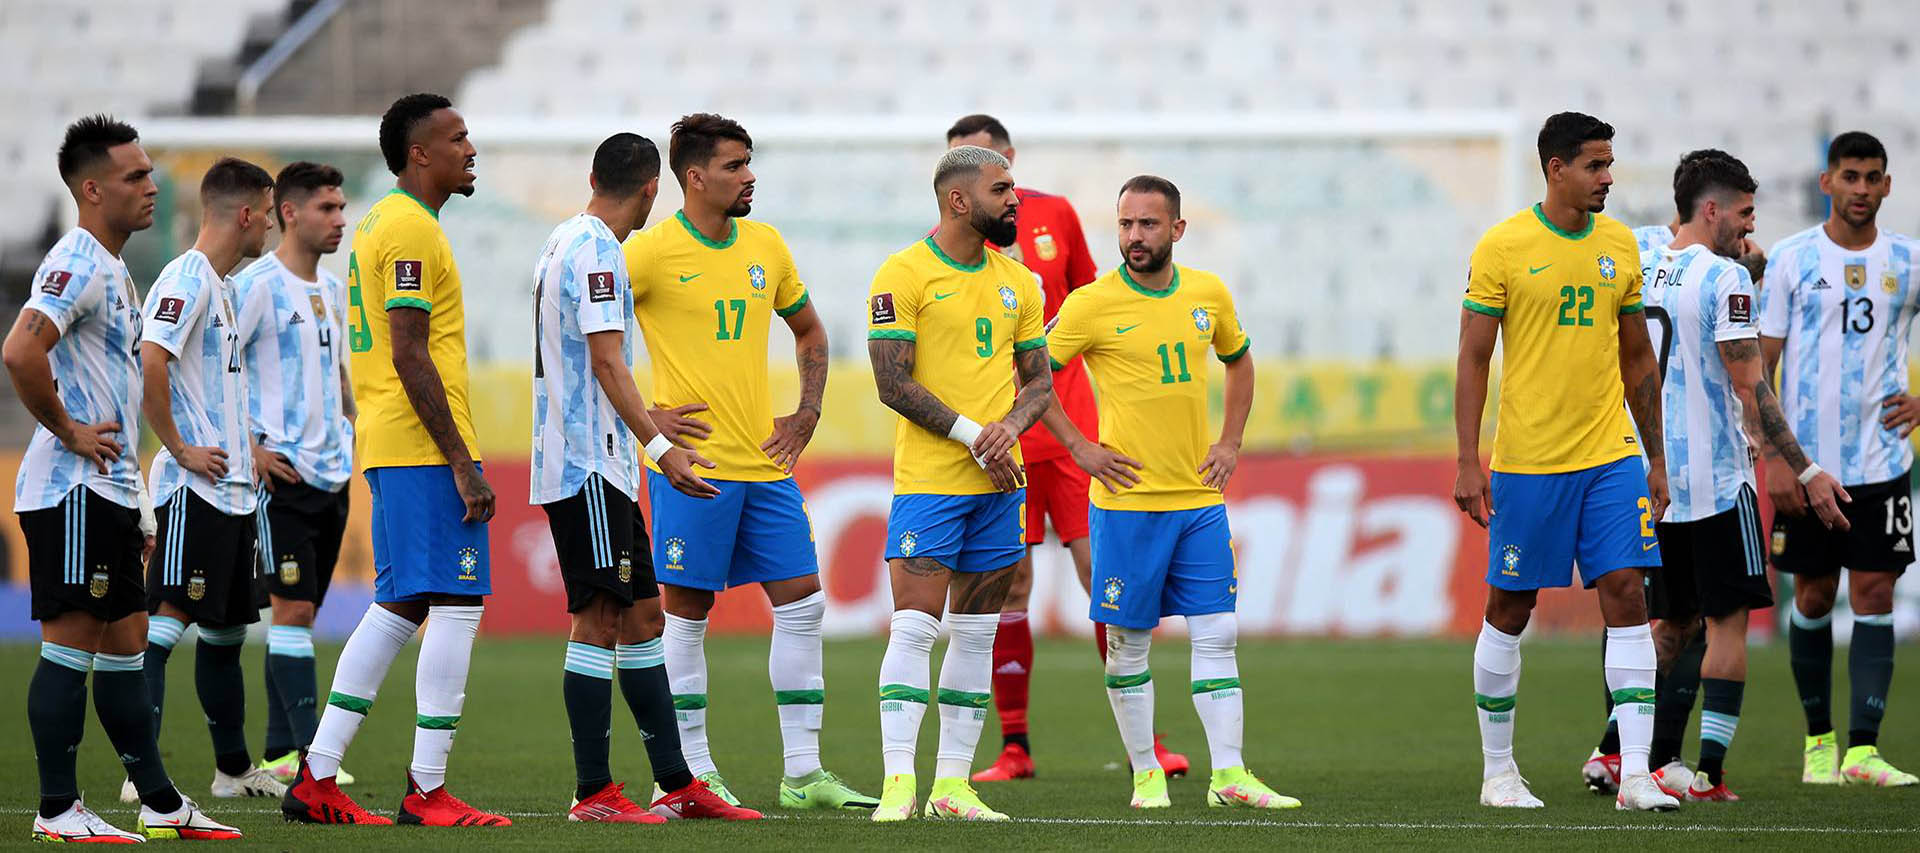 2022 FIFA World Cup Betting Analysis Top Three Key Players for Brazil, Uruguay, and Argentina